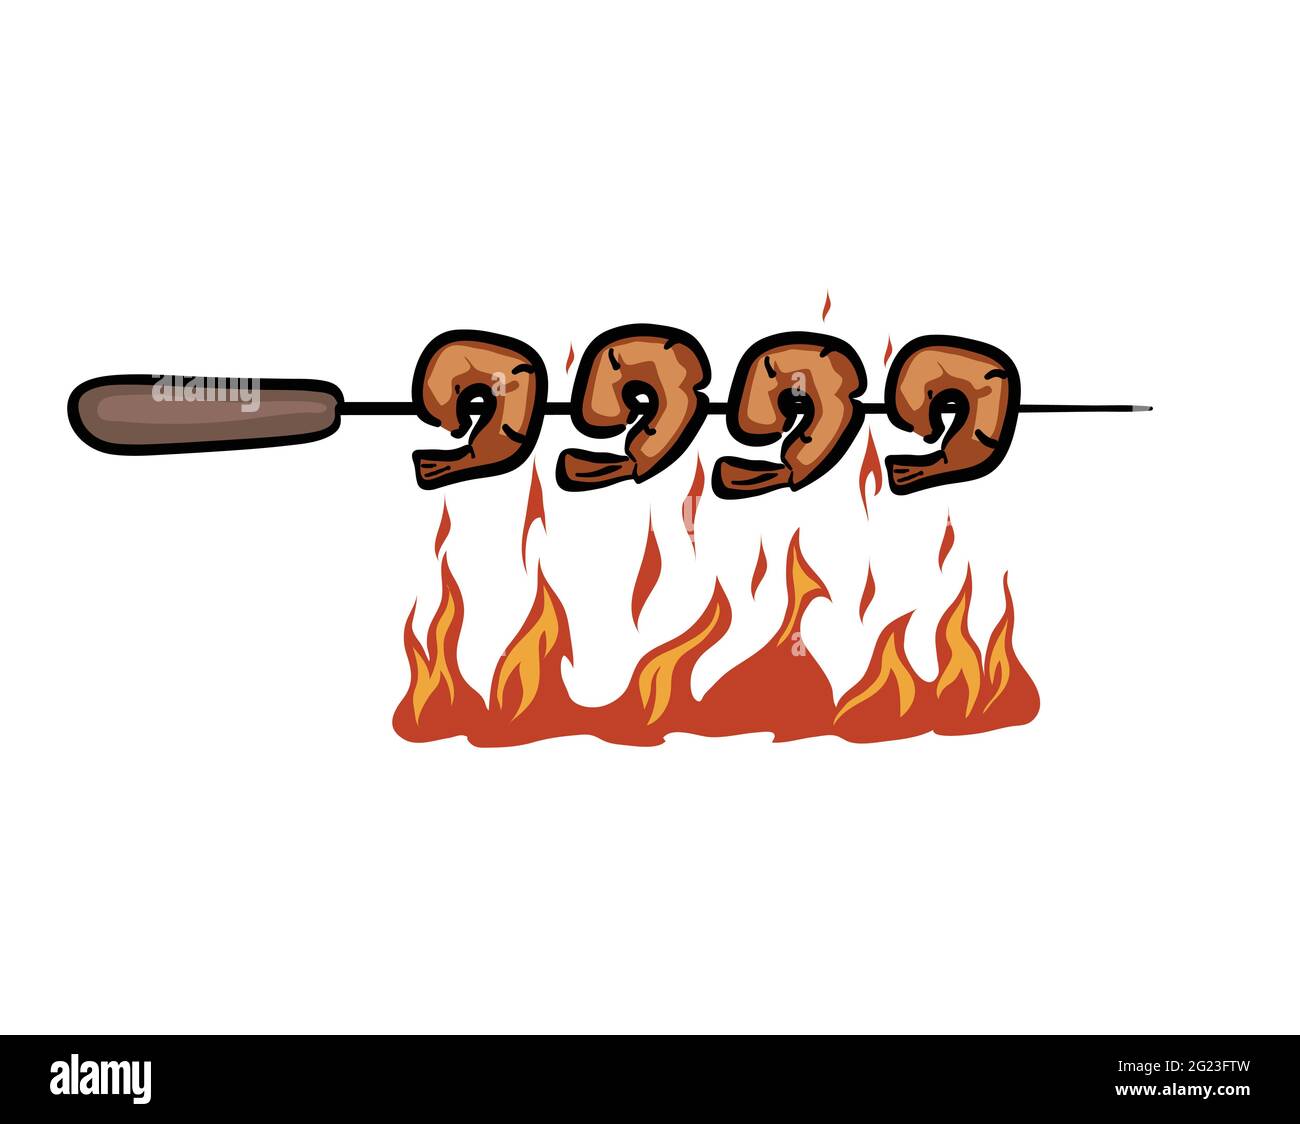 Prawns grilling on flame vector illustration Stock Vector